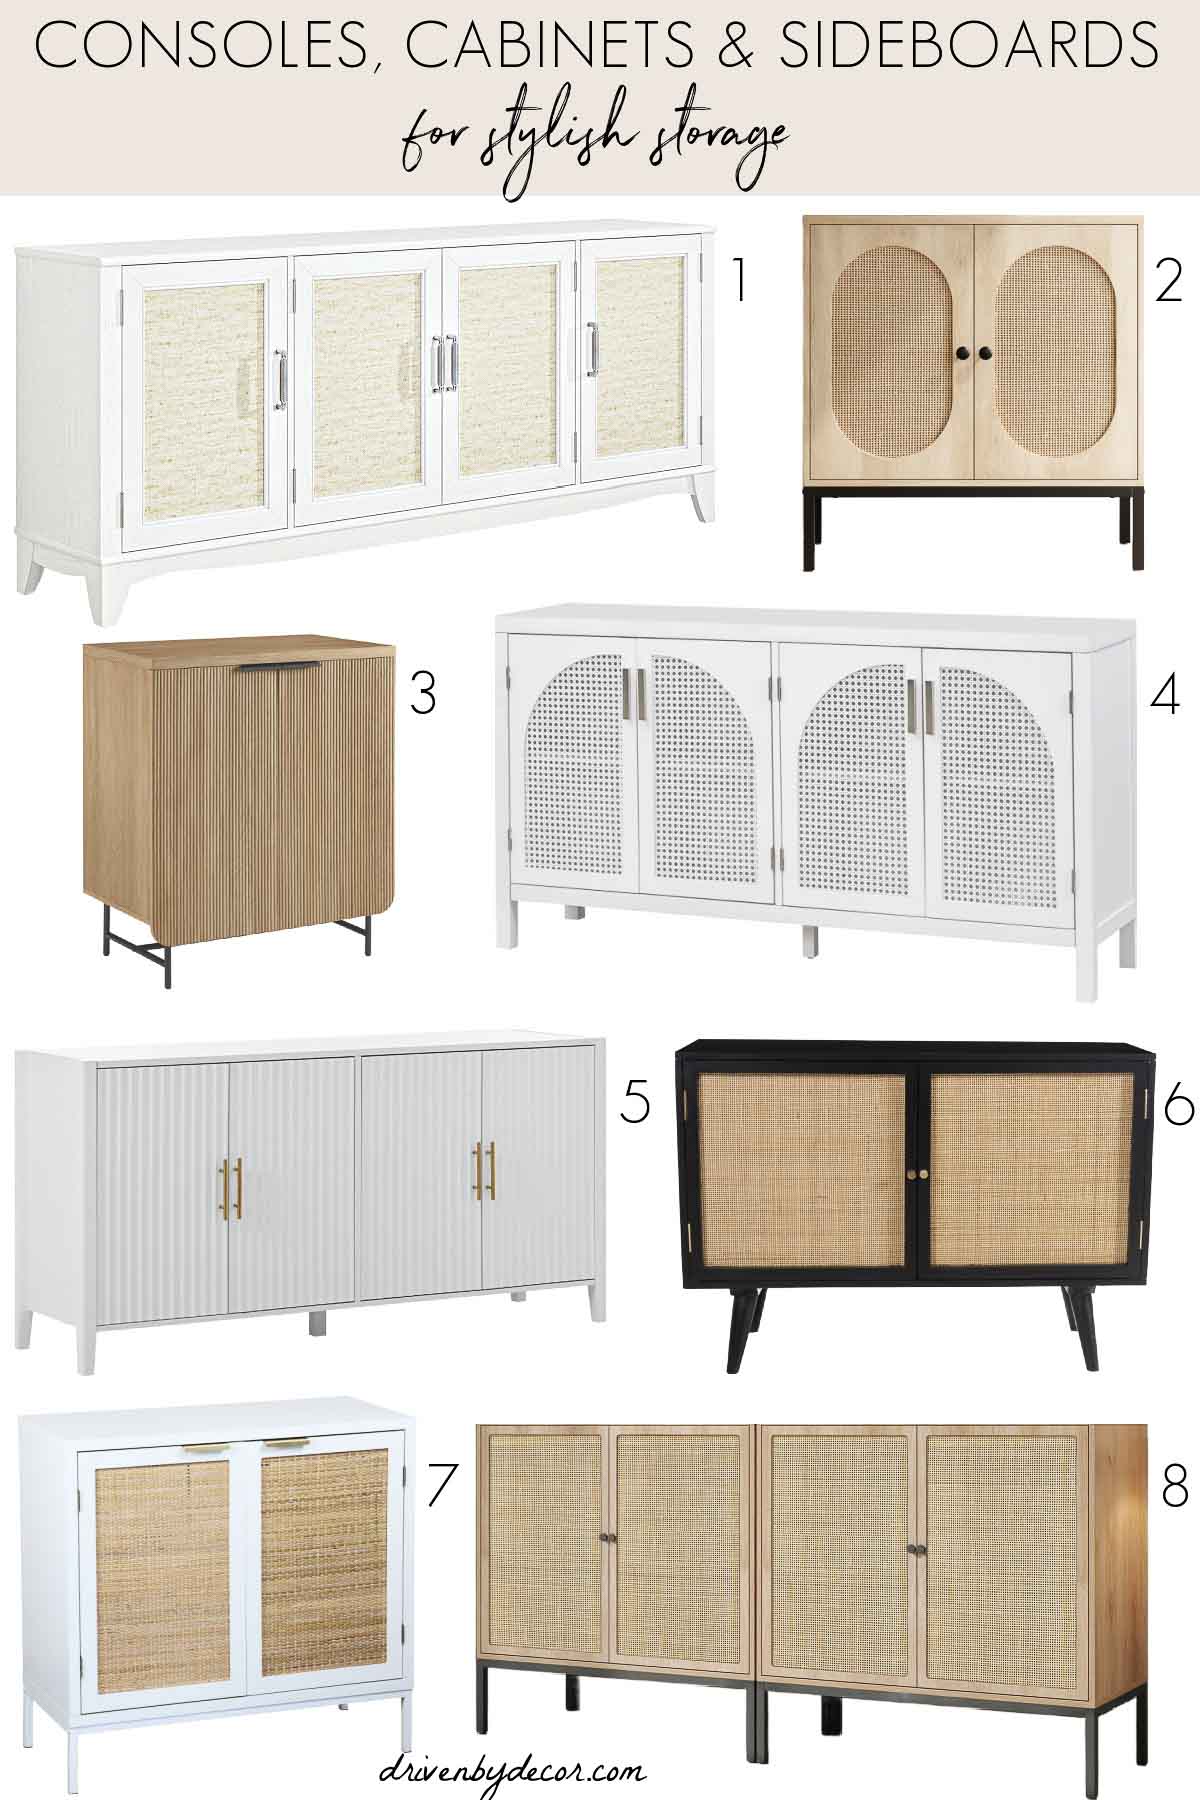 Stylish storage options: sideboards and cabinets